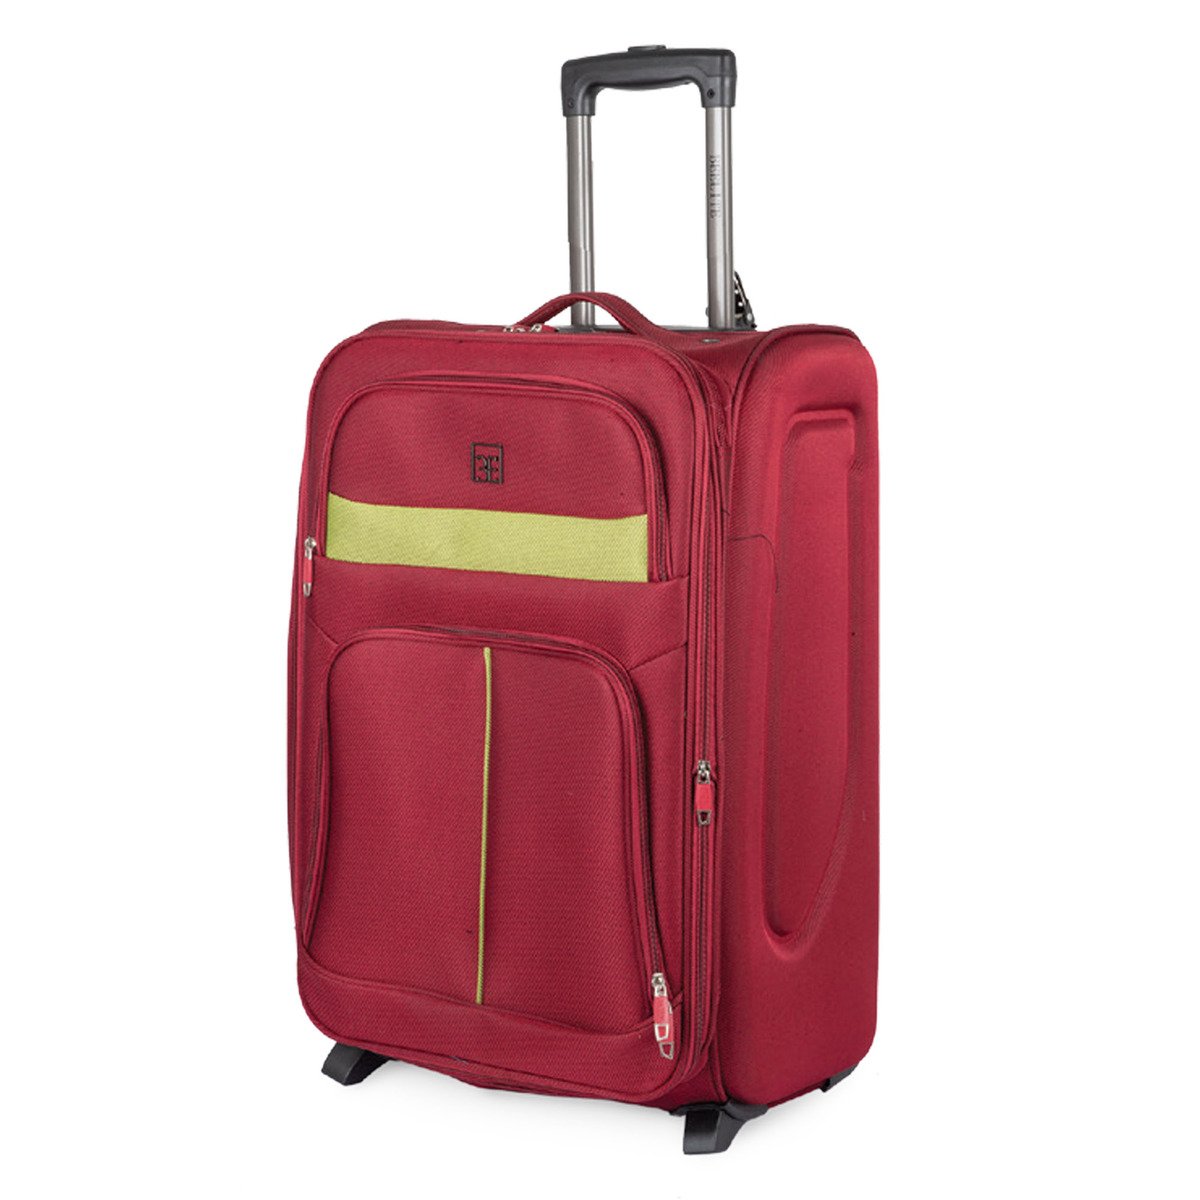 Beelite Soft Trolley FT0089 20inch Assorted Colors